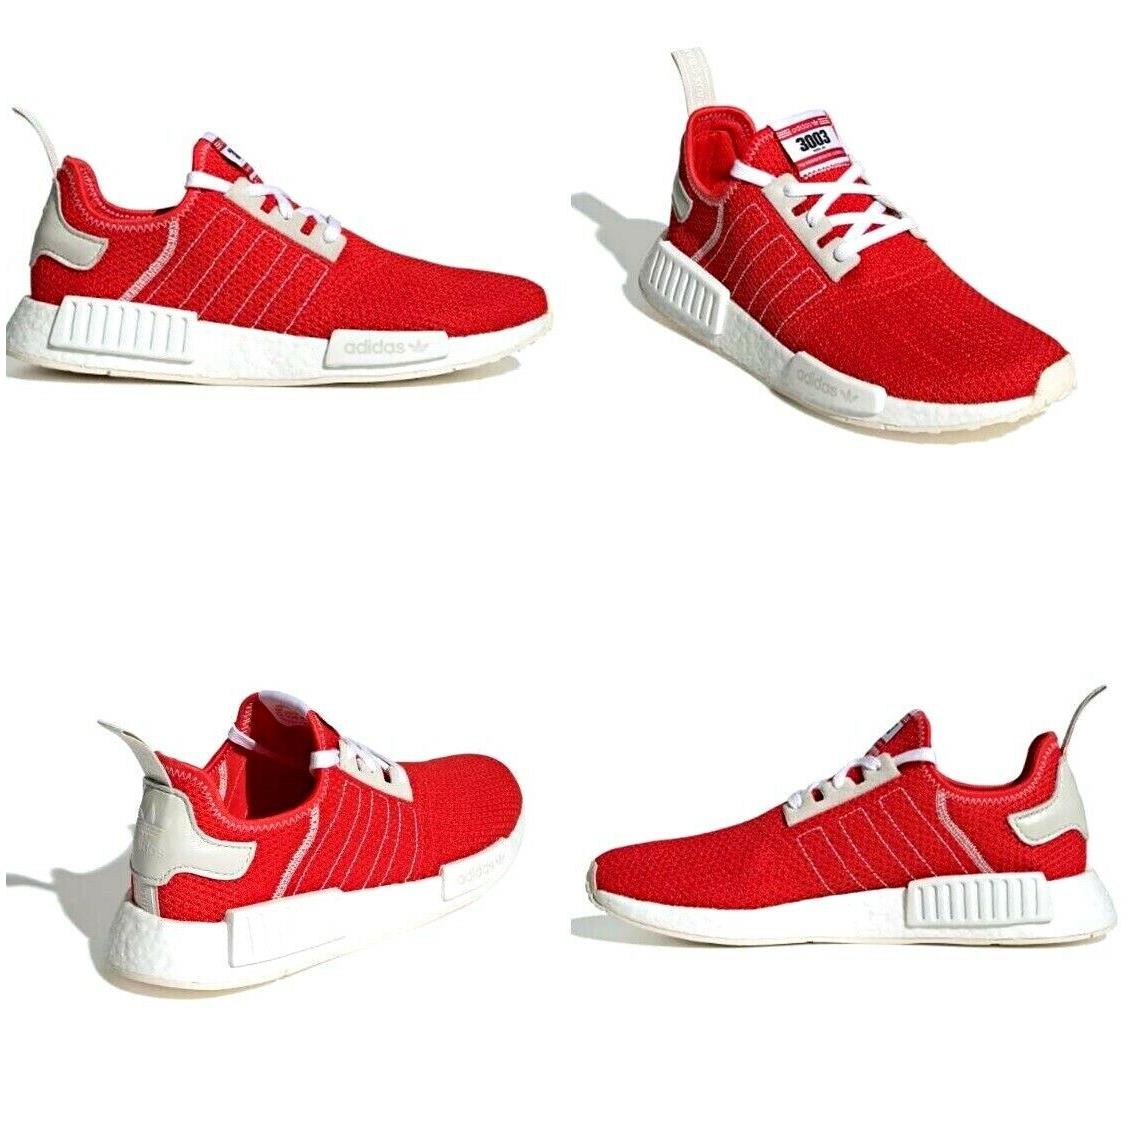 Adidas Nmd R1 Boost Running Shoes Active Red Ecru Tint Mens Size 9 US BD7897